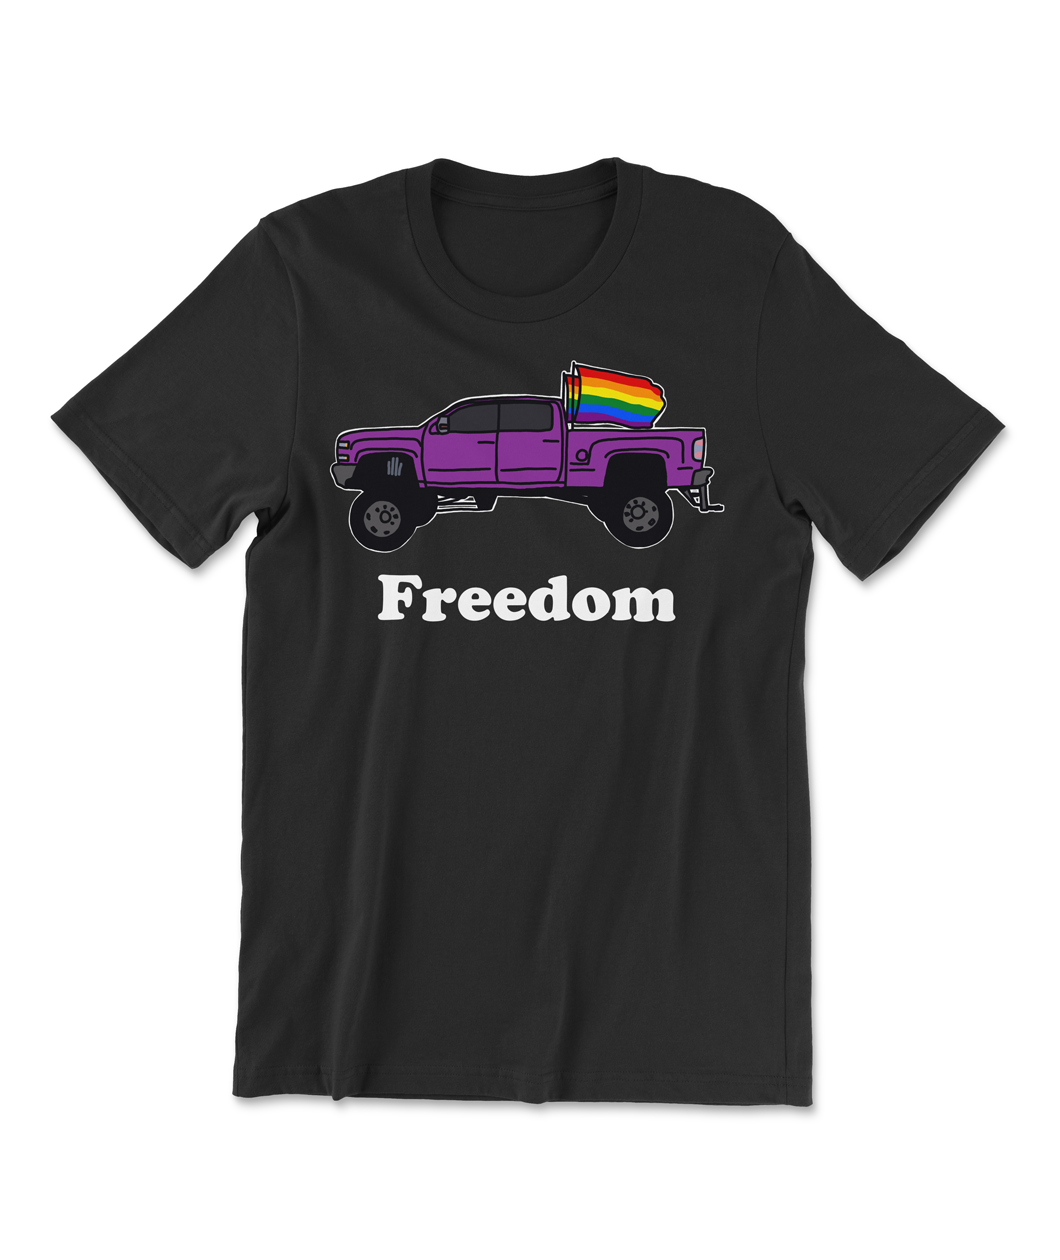 A black t-shirt with a lifted purple truck with pride flags flying from the back and the text 